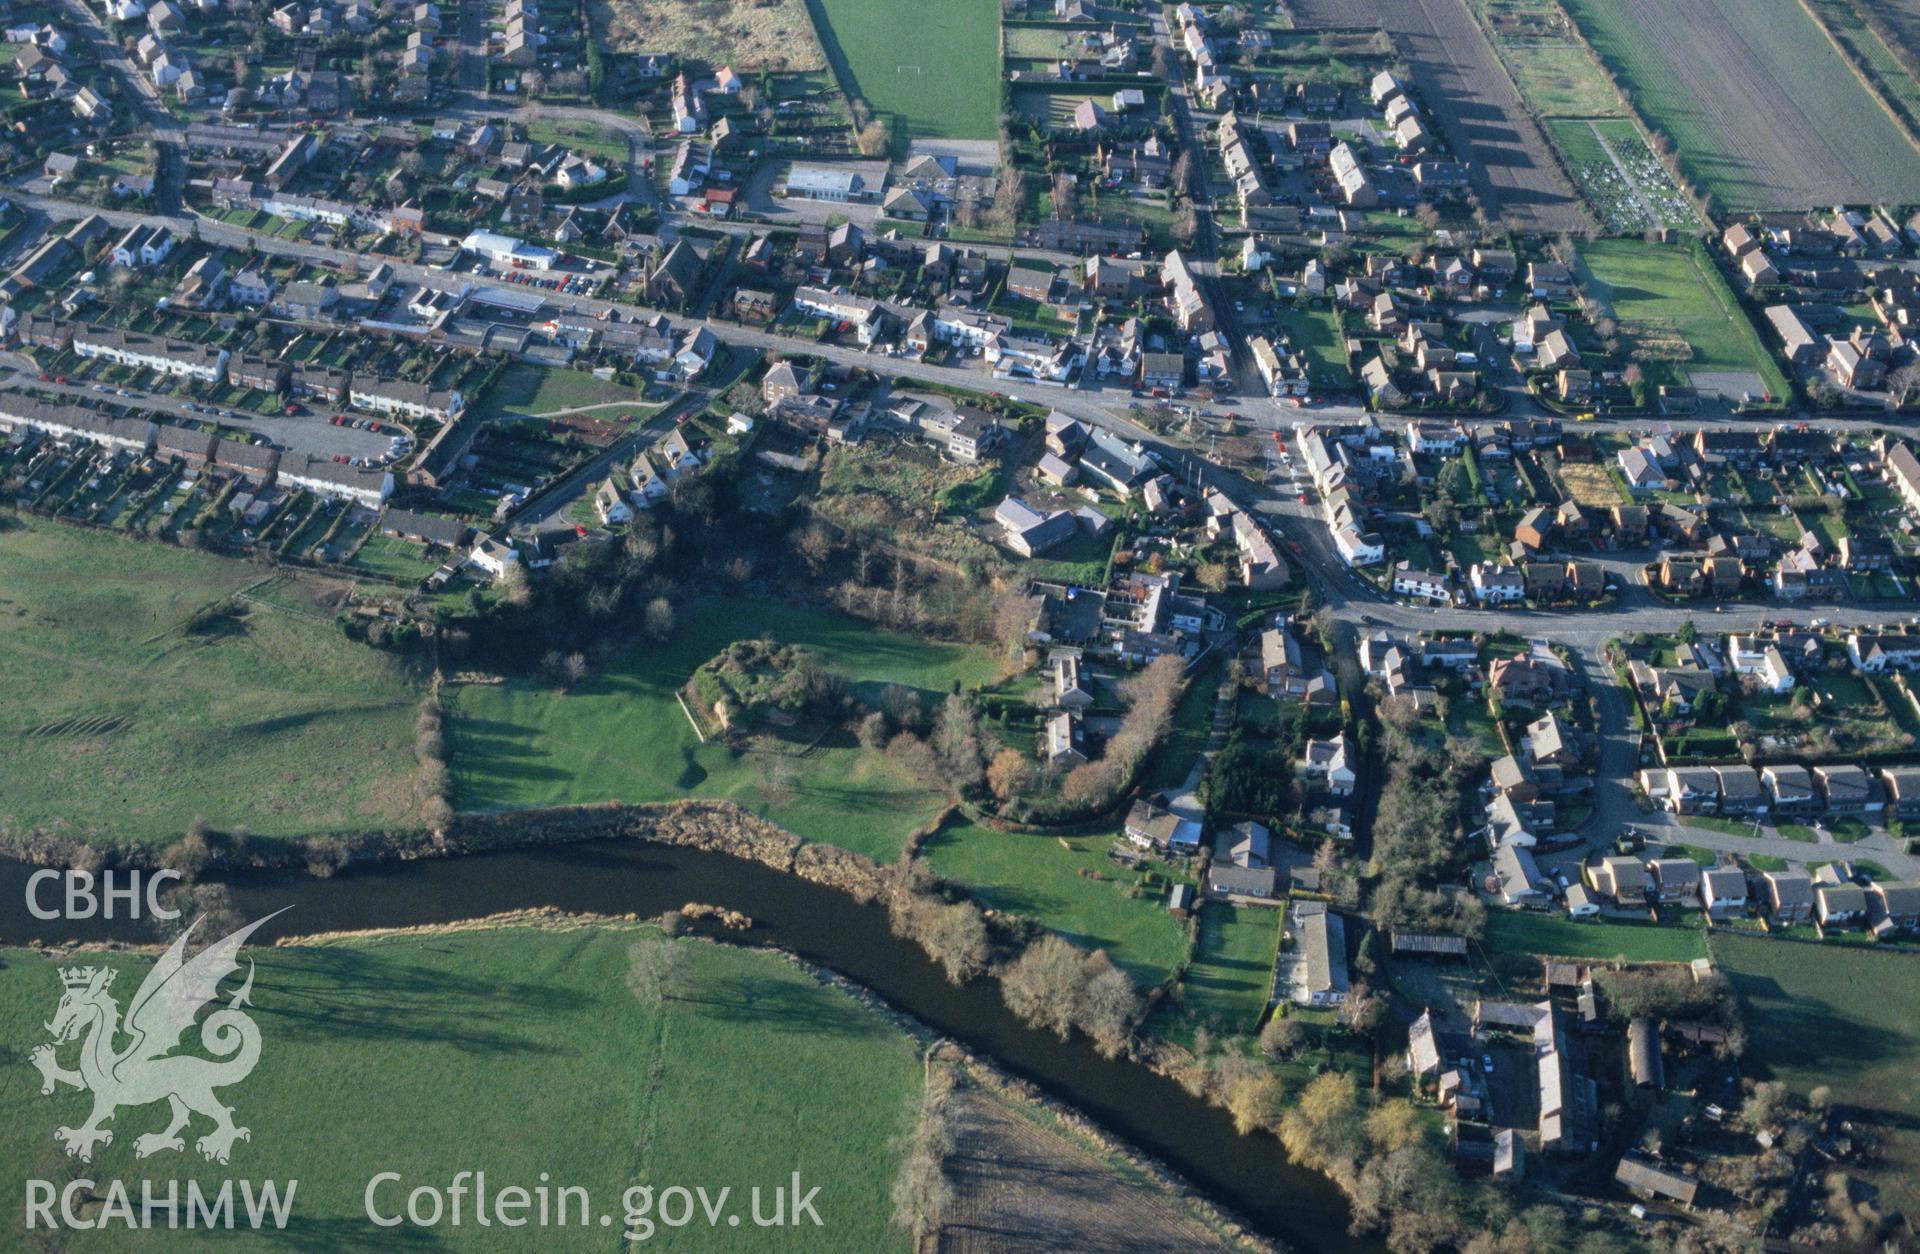 Slide of RCAHMW colour oblique aerial photograph of Holt, taken by C.R. Musson, 22/12/1996.